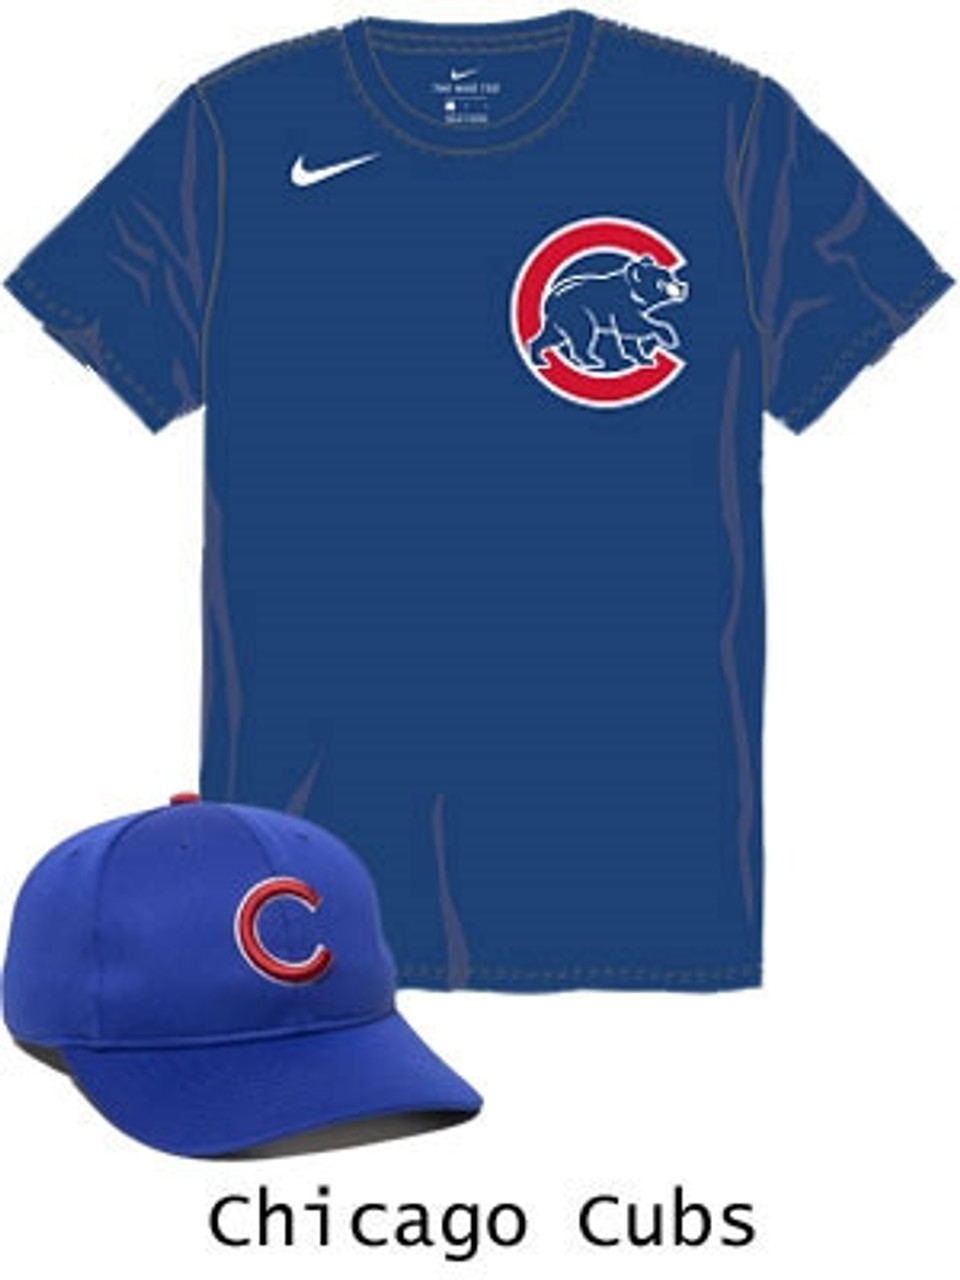 NWT XXL Chicago Cubs Nike BSBL Dri Fit Authentic Collection Shirt